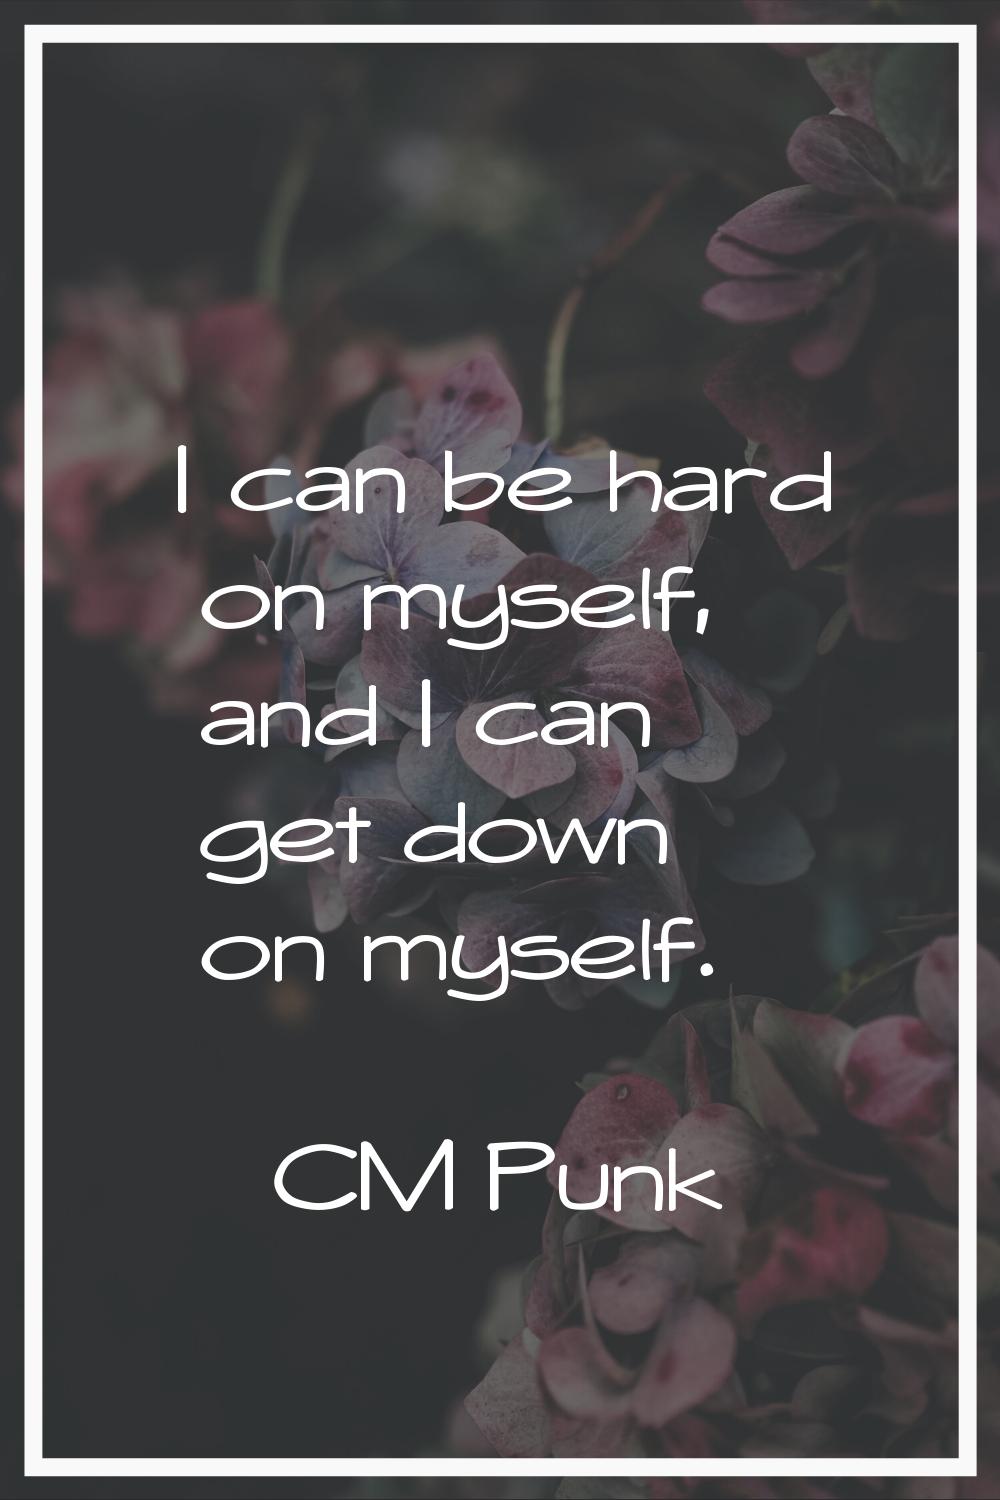 I can be hard on myself, and I can get down on myself.